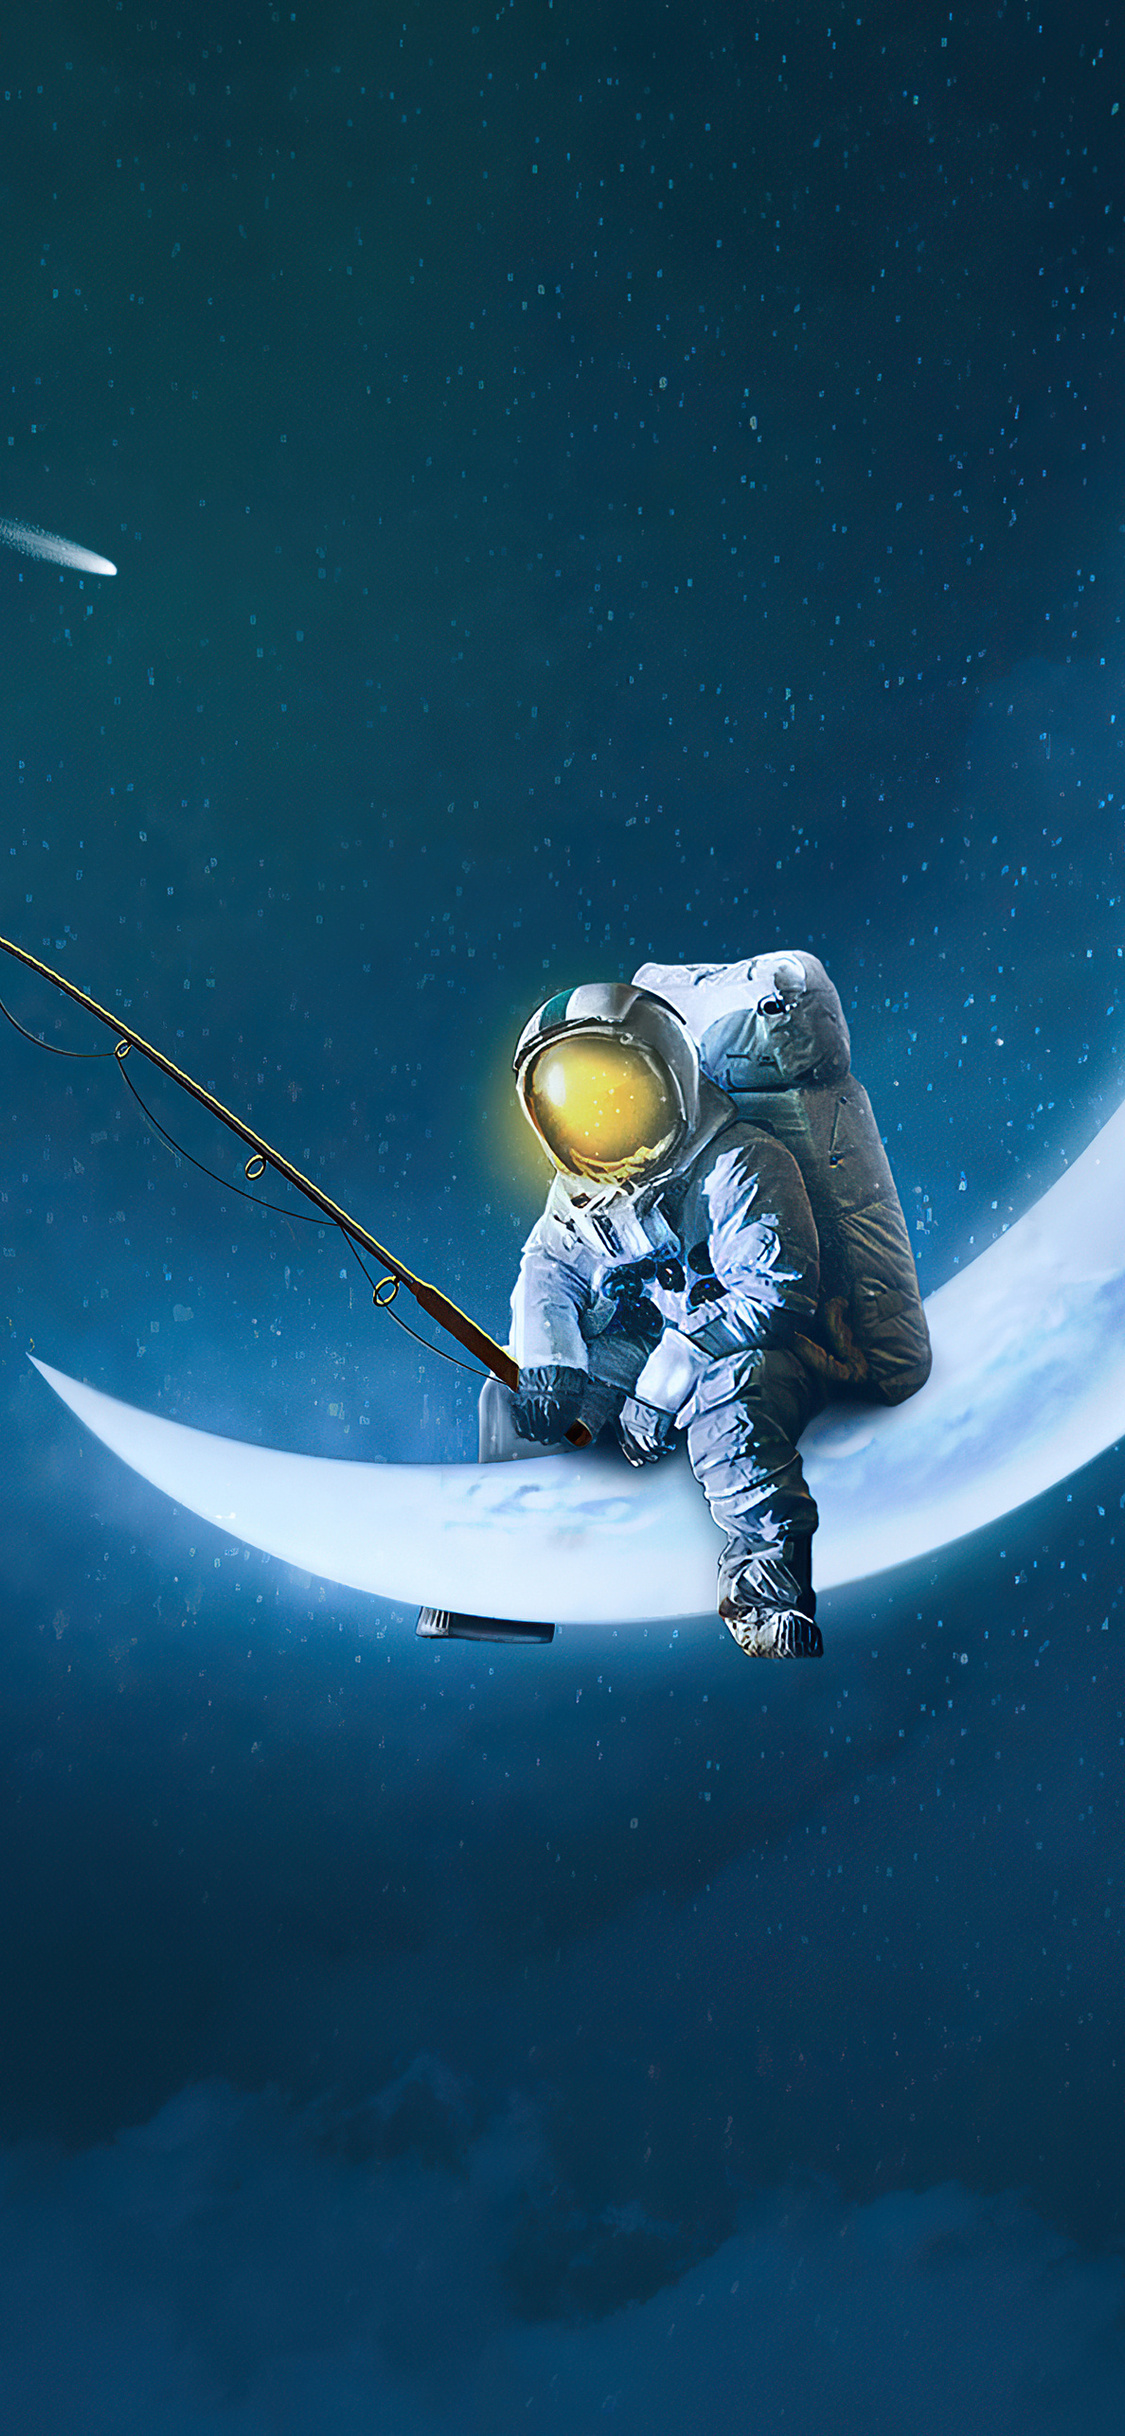 X astronaut imagination iphone xsiphone iphone x hd k wallpapers images backgrounds photos and pictures